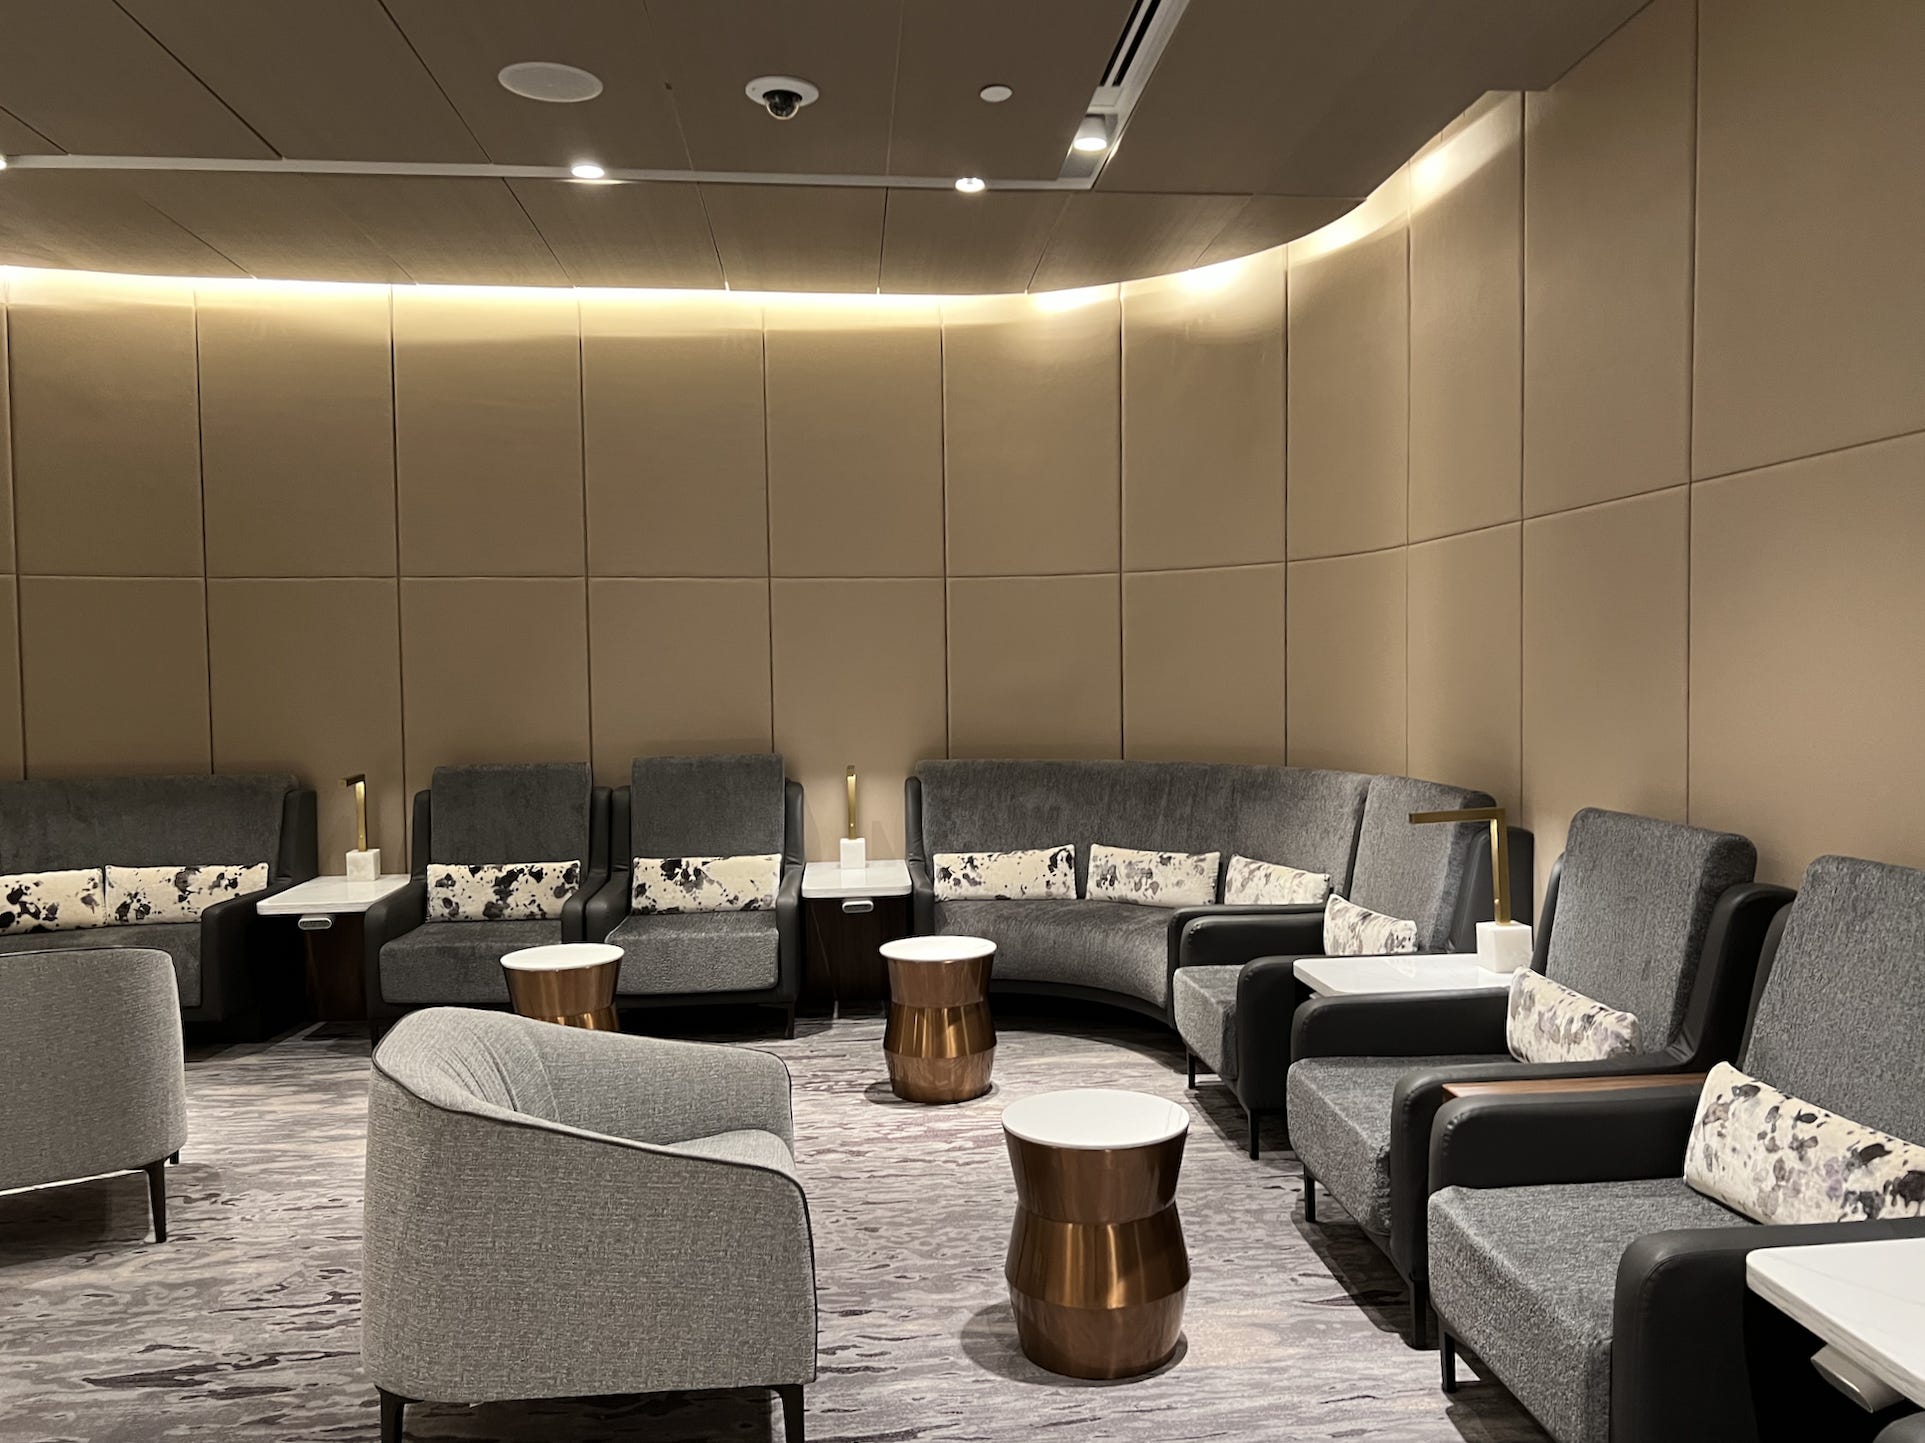 American and British Airways' co-branded Soho Lounge.